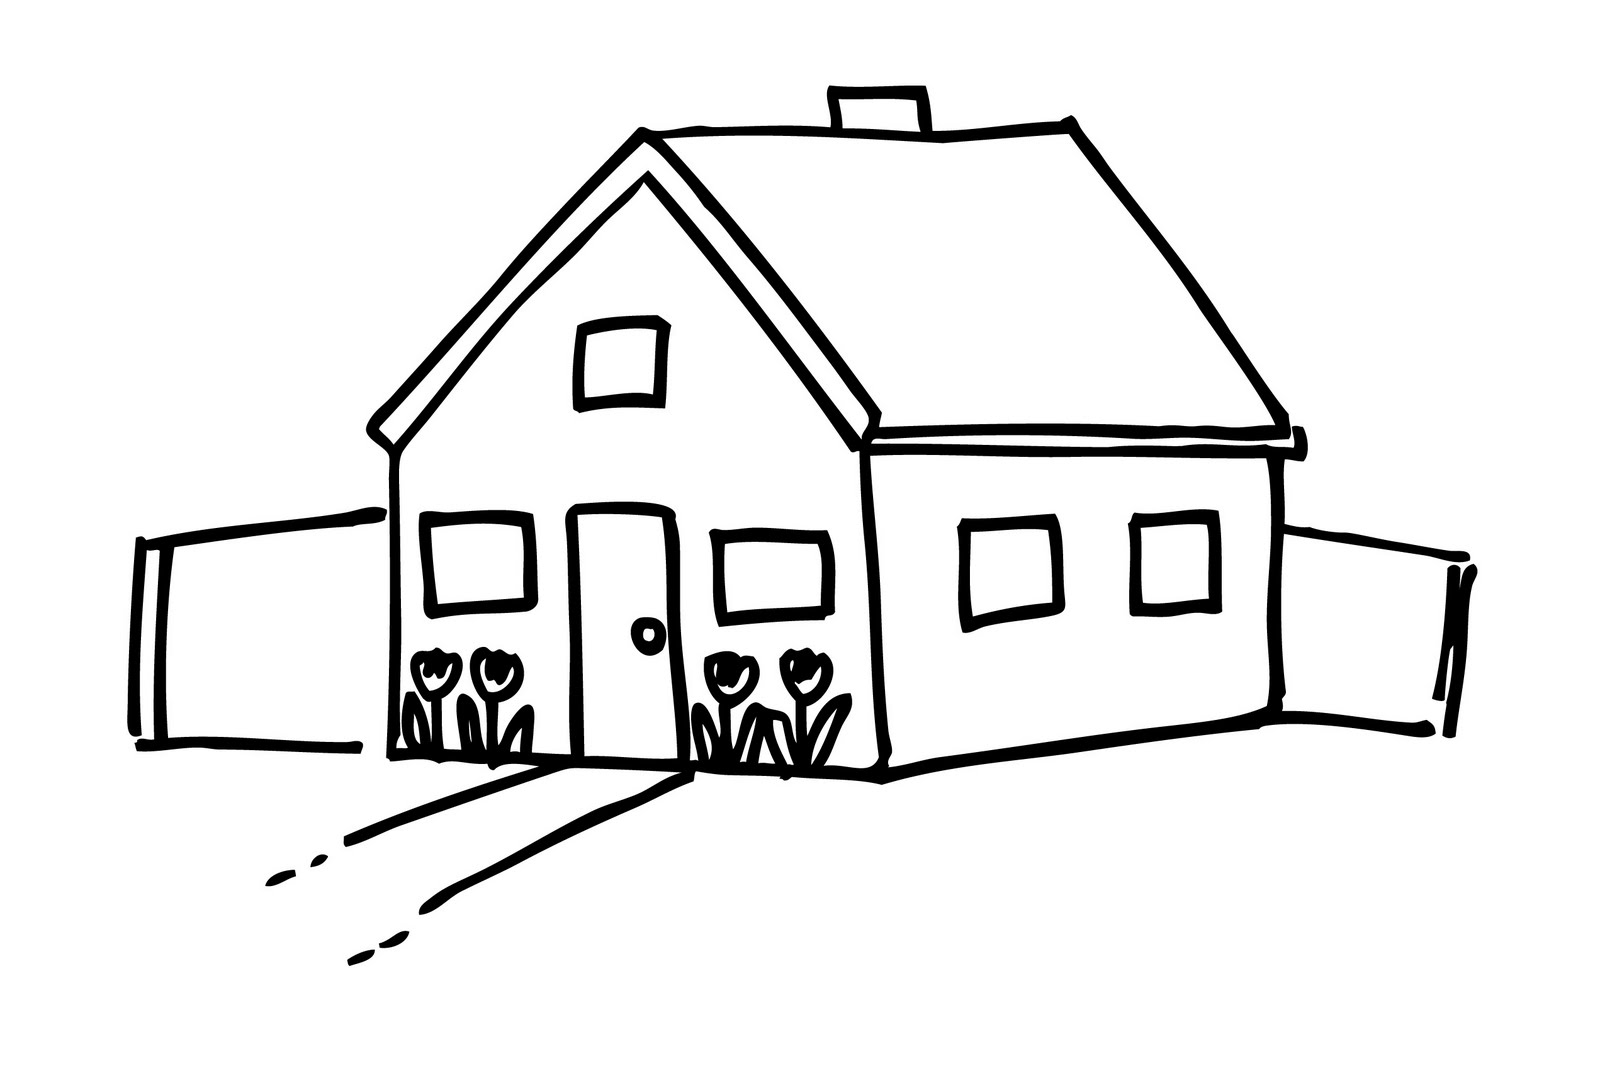 Straw house clipart black and white